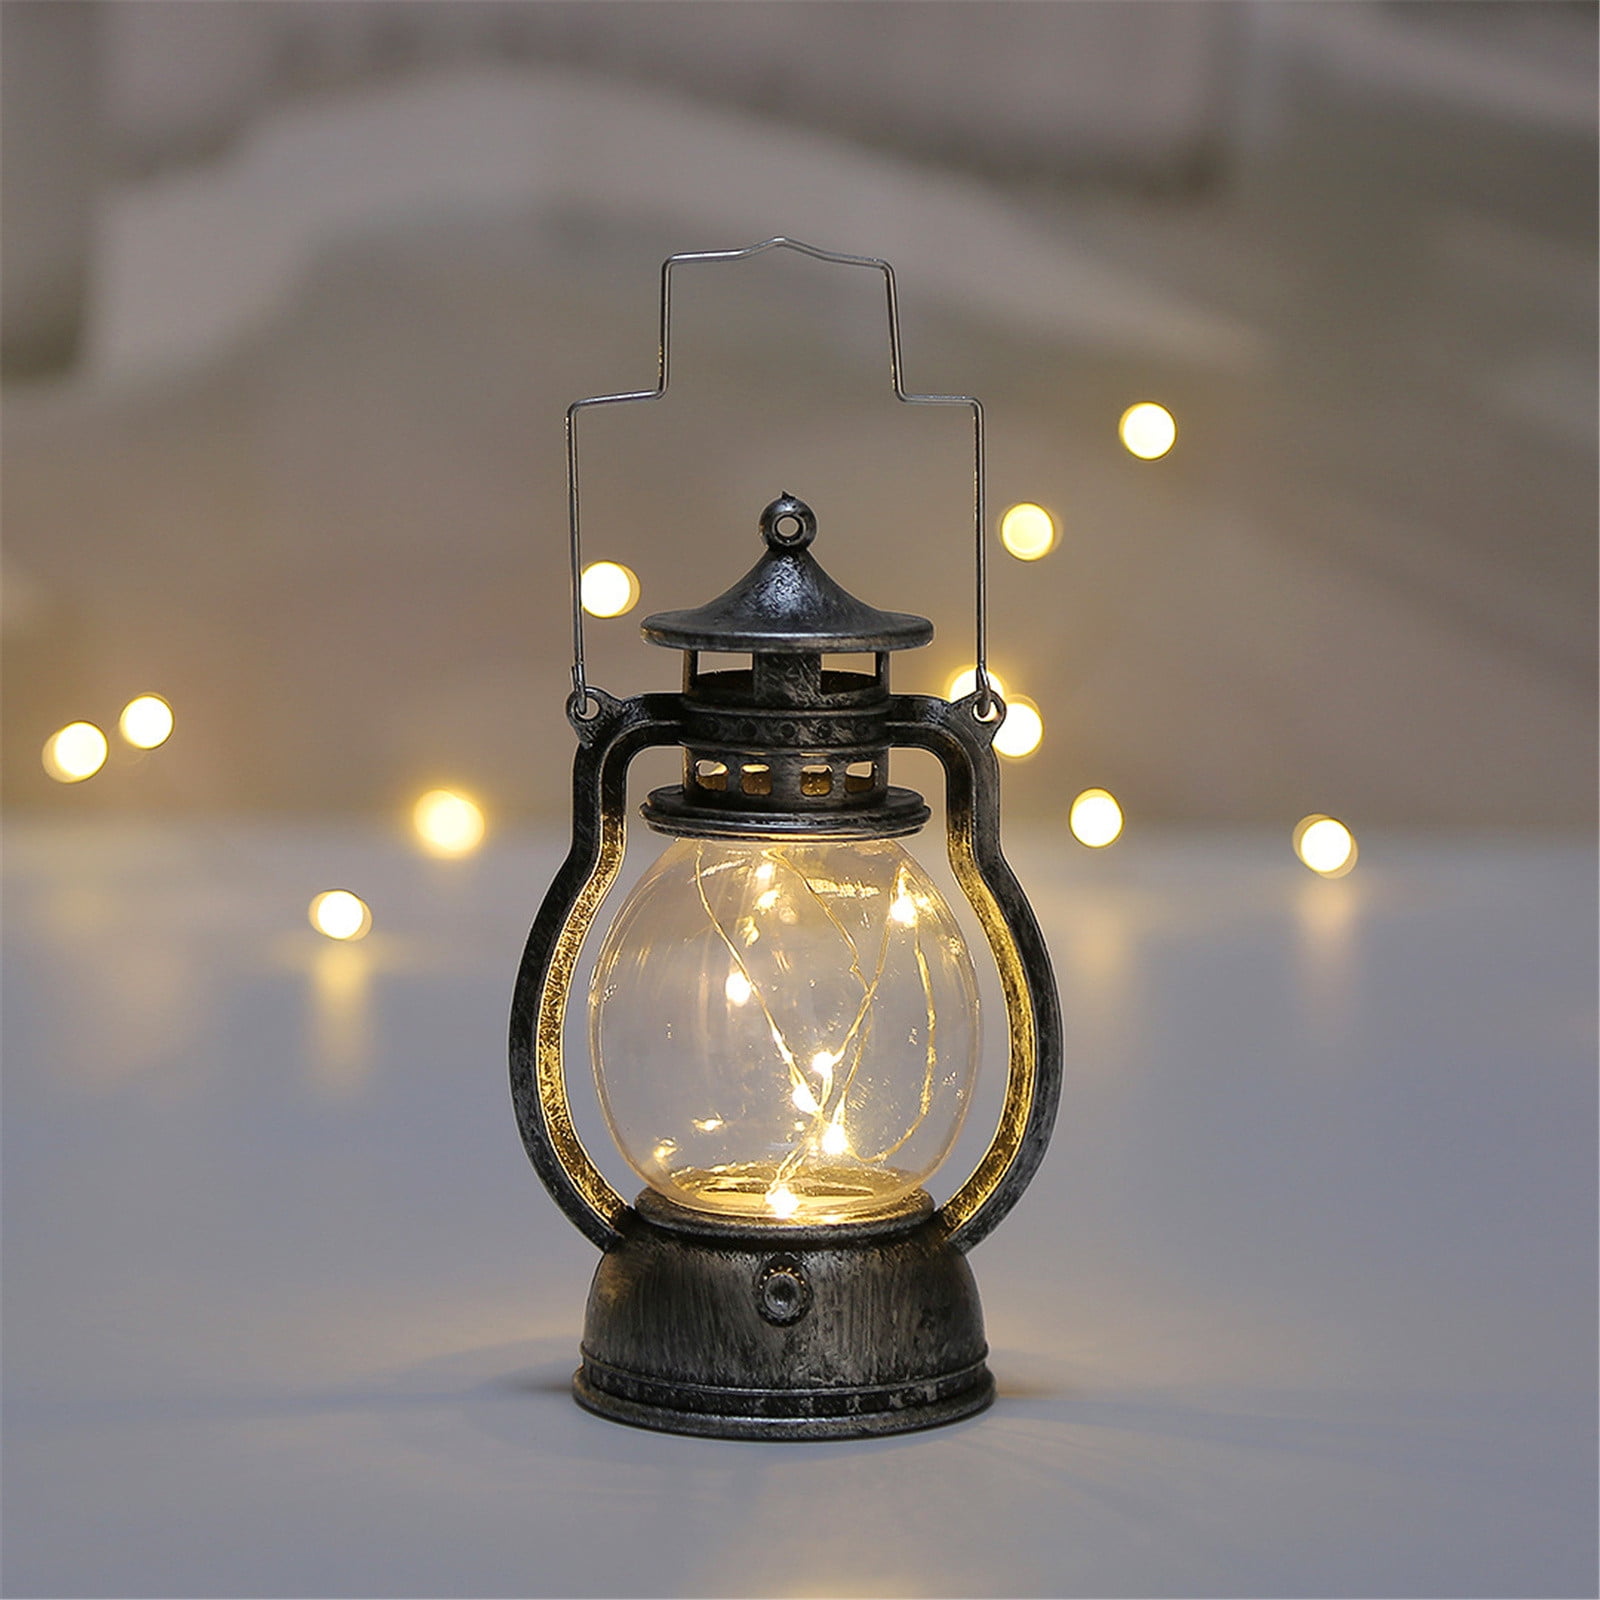 Lights4fun, Inc. 12.5 Black Metal Battery Operated LED Flameless Candle Lantern Light for Indoor & Outdoor Use